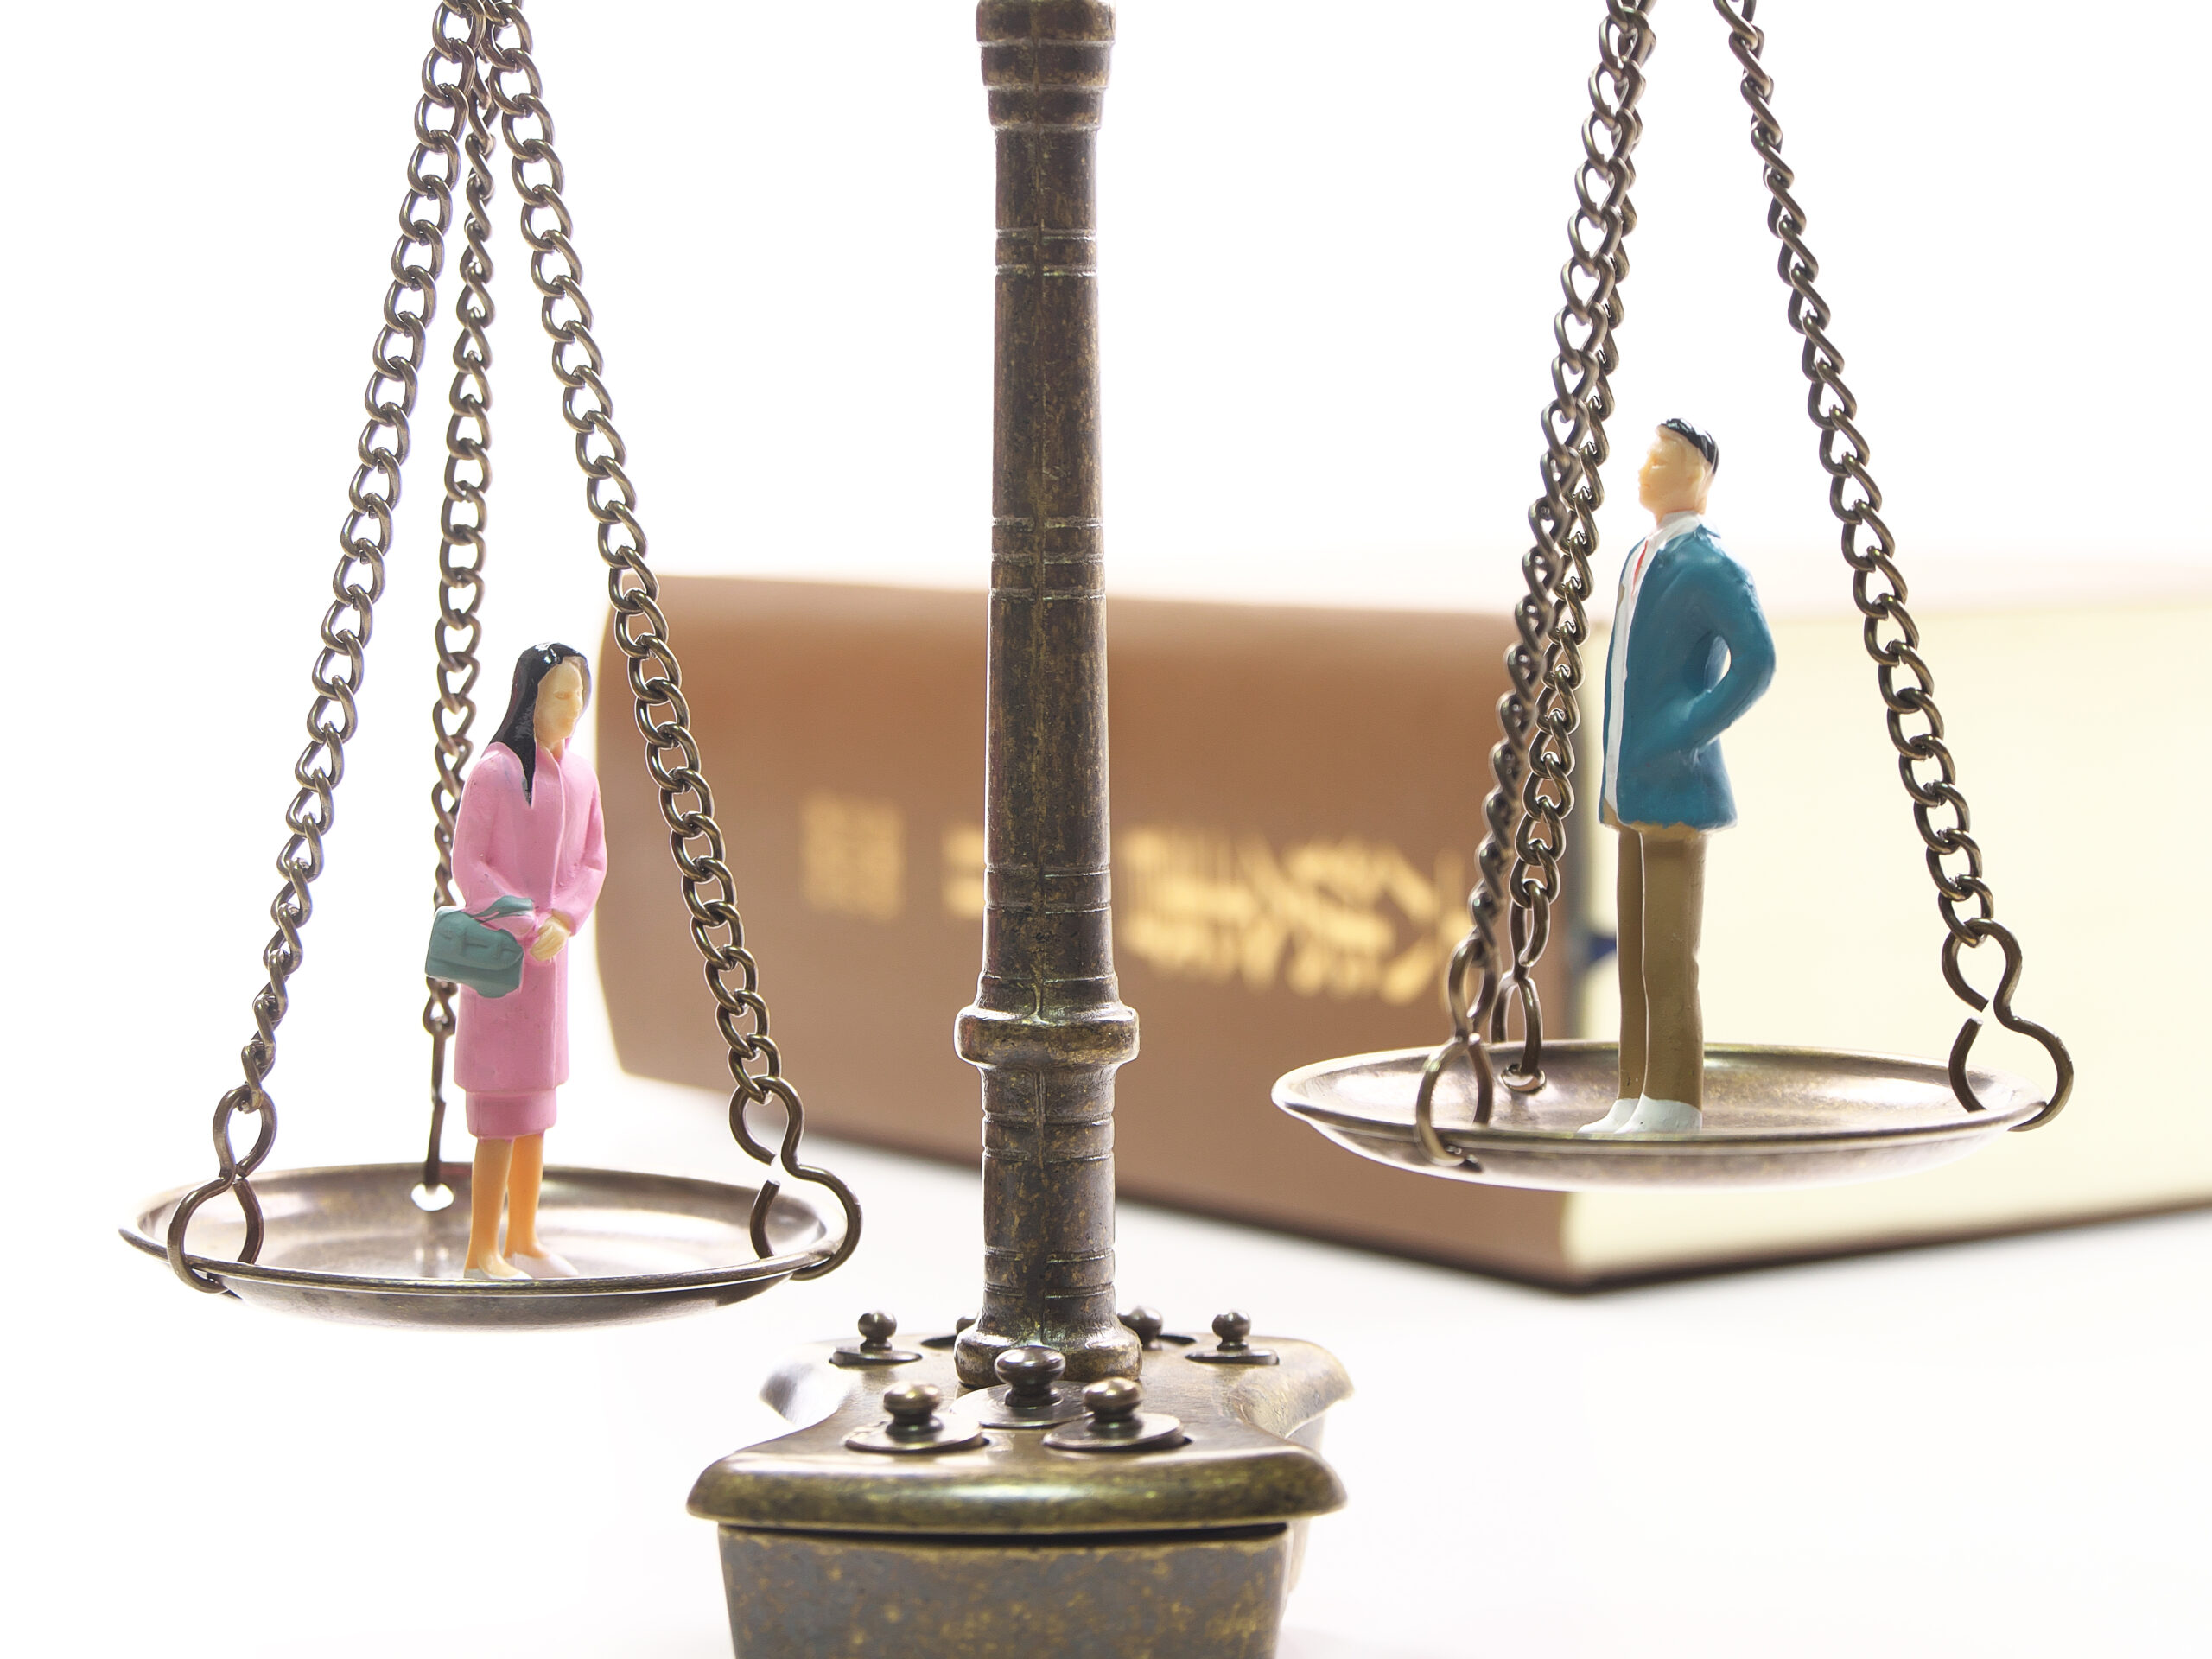 little people on scales of justice